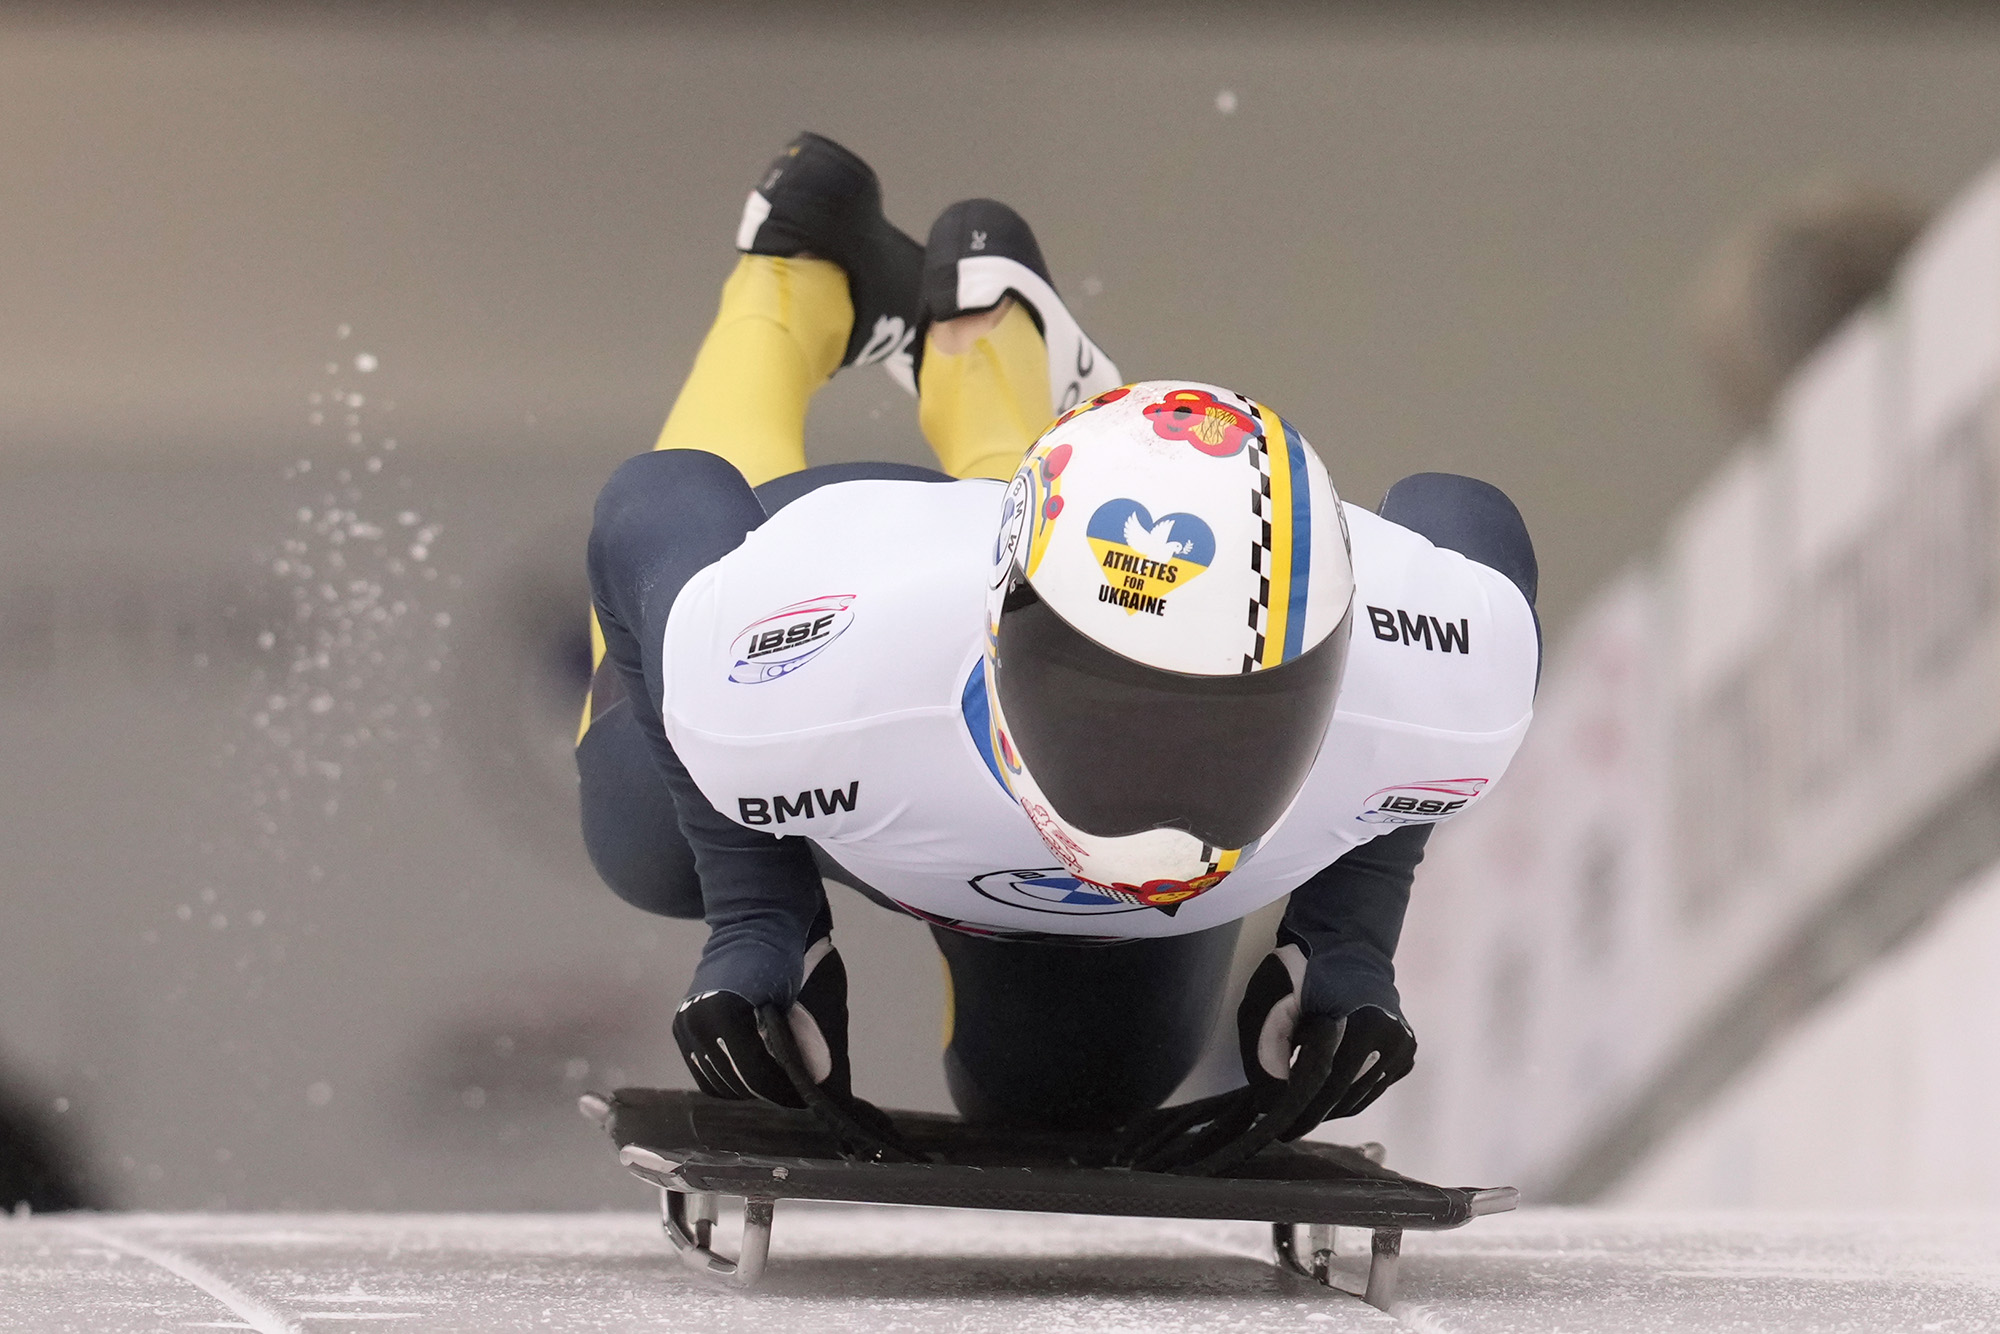 Vladyslav Heraskevych of Ukraine compete in the Men's Skeleton during the BMW IBSF Bob & Skeleton World Cup at the Veltins-EisArena on January 6, in Winterberg, Germany 